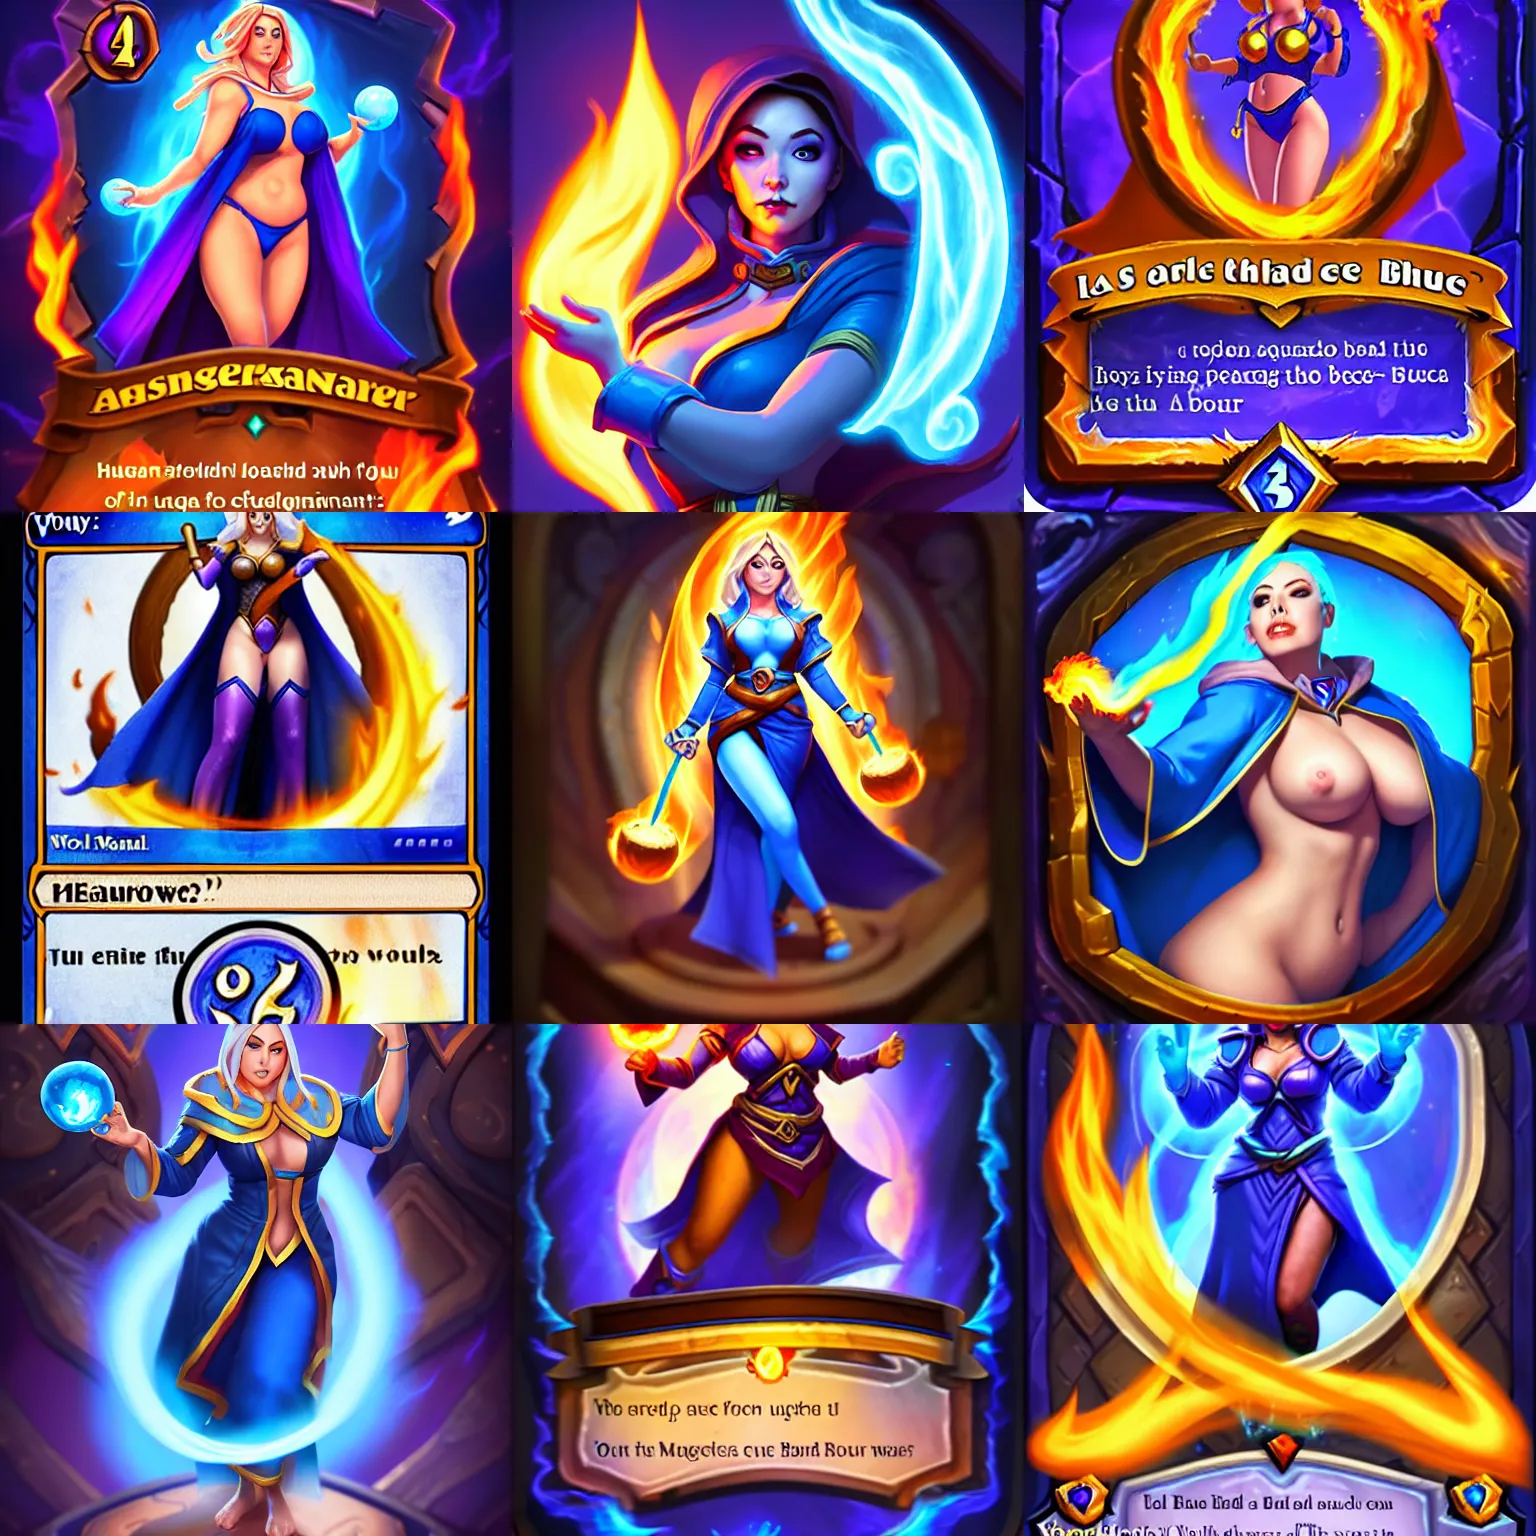 Prompt: Who : a female mage with a blue robe casting a fire ball ; Body type : voluptious hourglass body ; Head : Beautiful face ; IMPORTANT : Hearthstone official splash art, award winning, trending